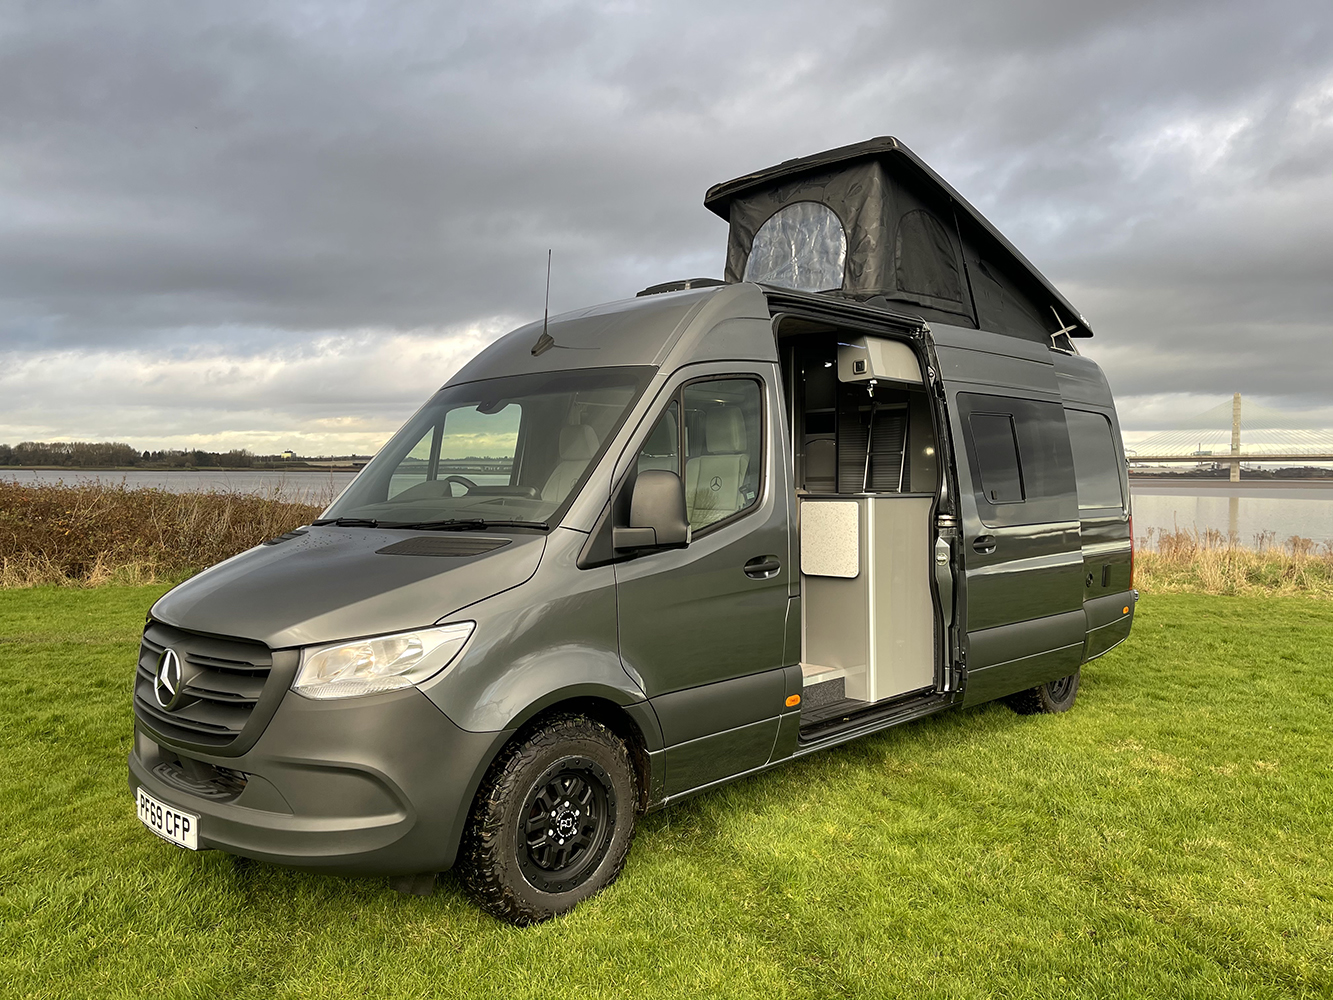 SOLD SOLD SOLD SOLD 2019 LWB Mercedes Sprinter 314 CDI Motorhome with ...